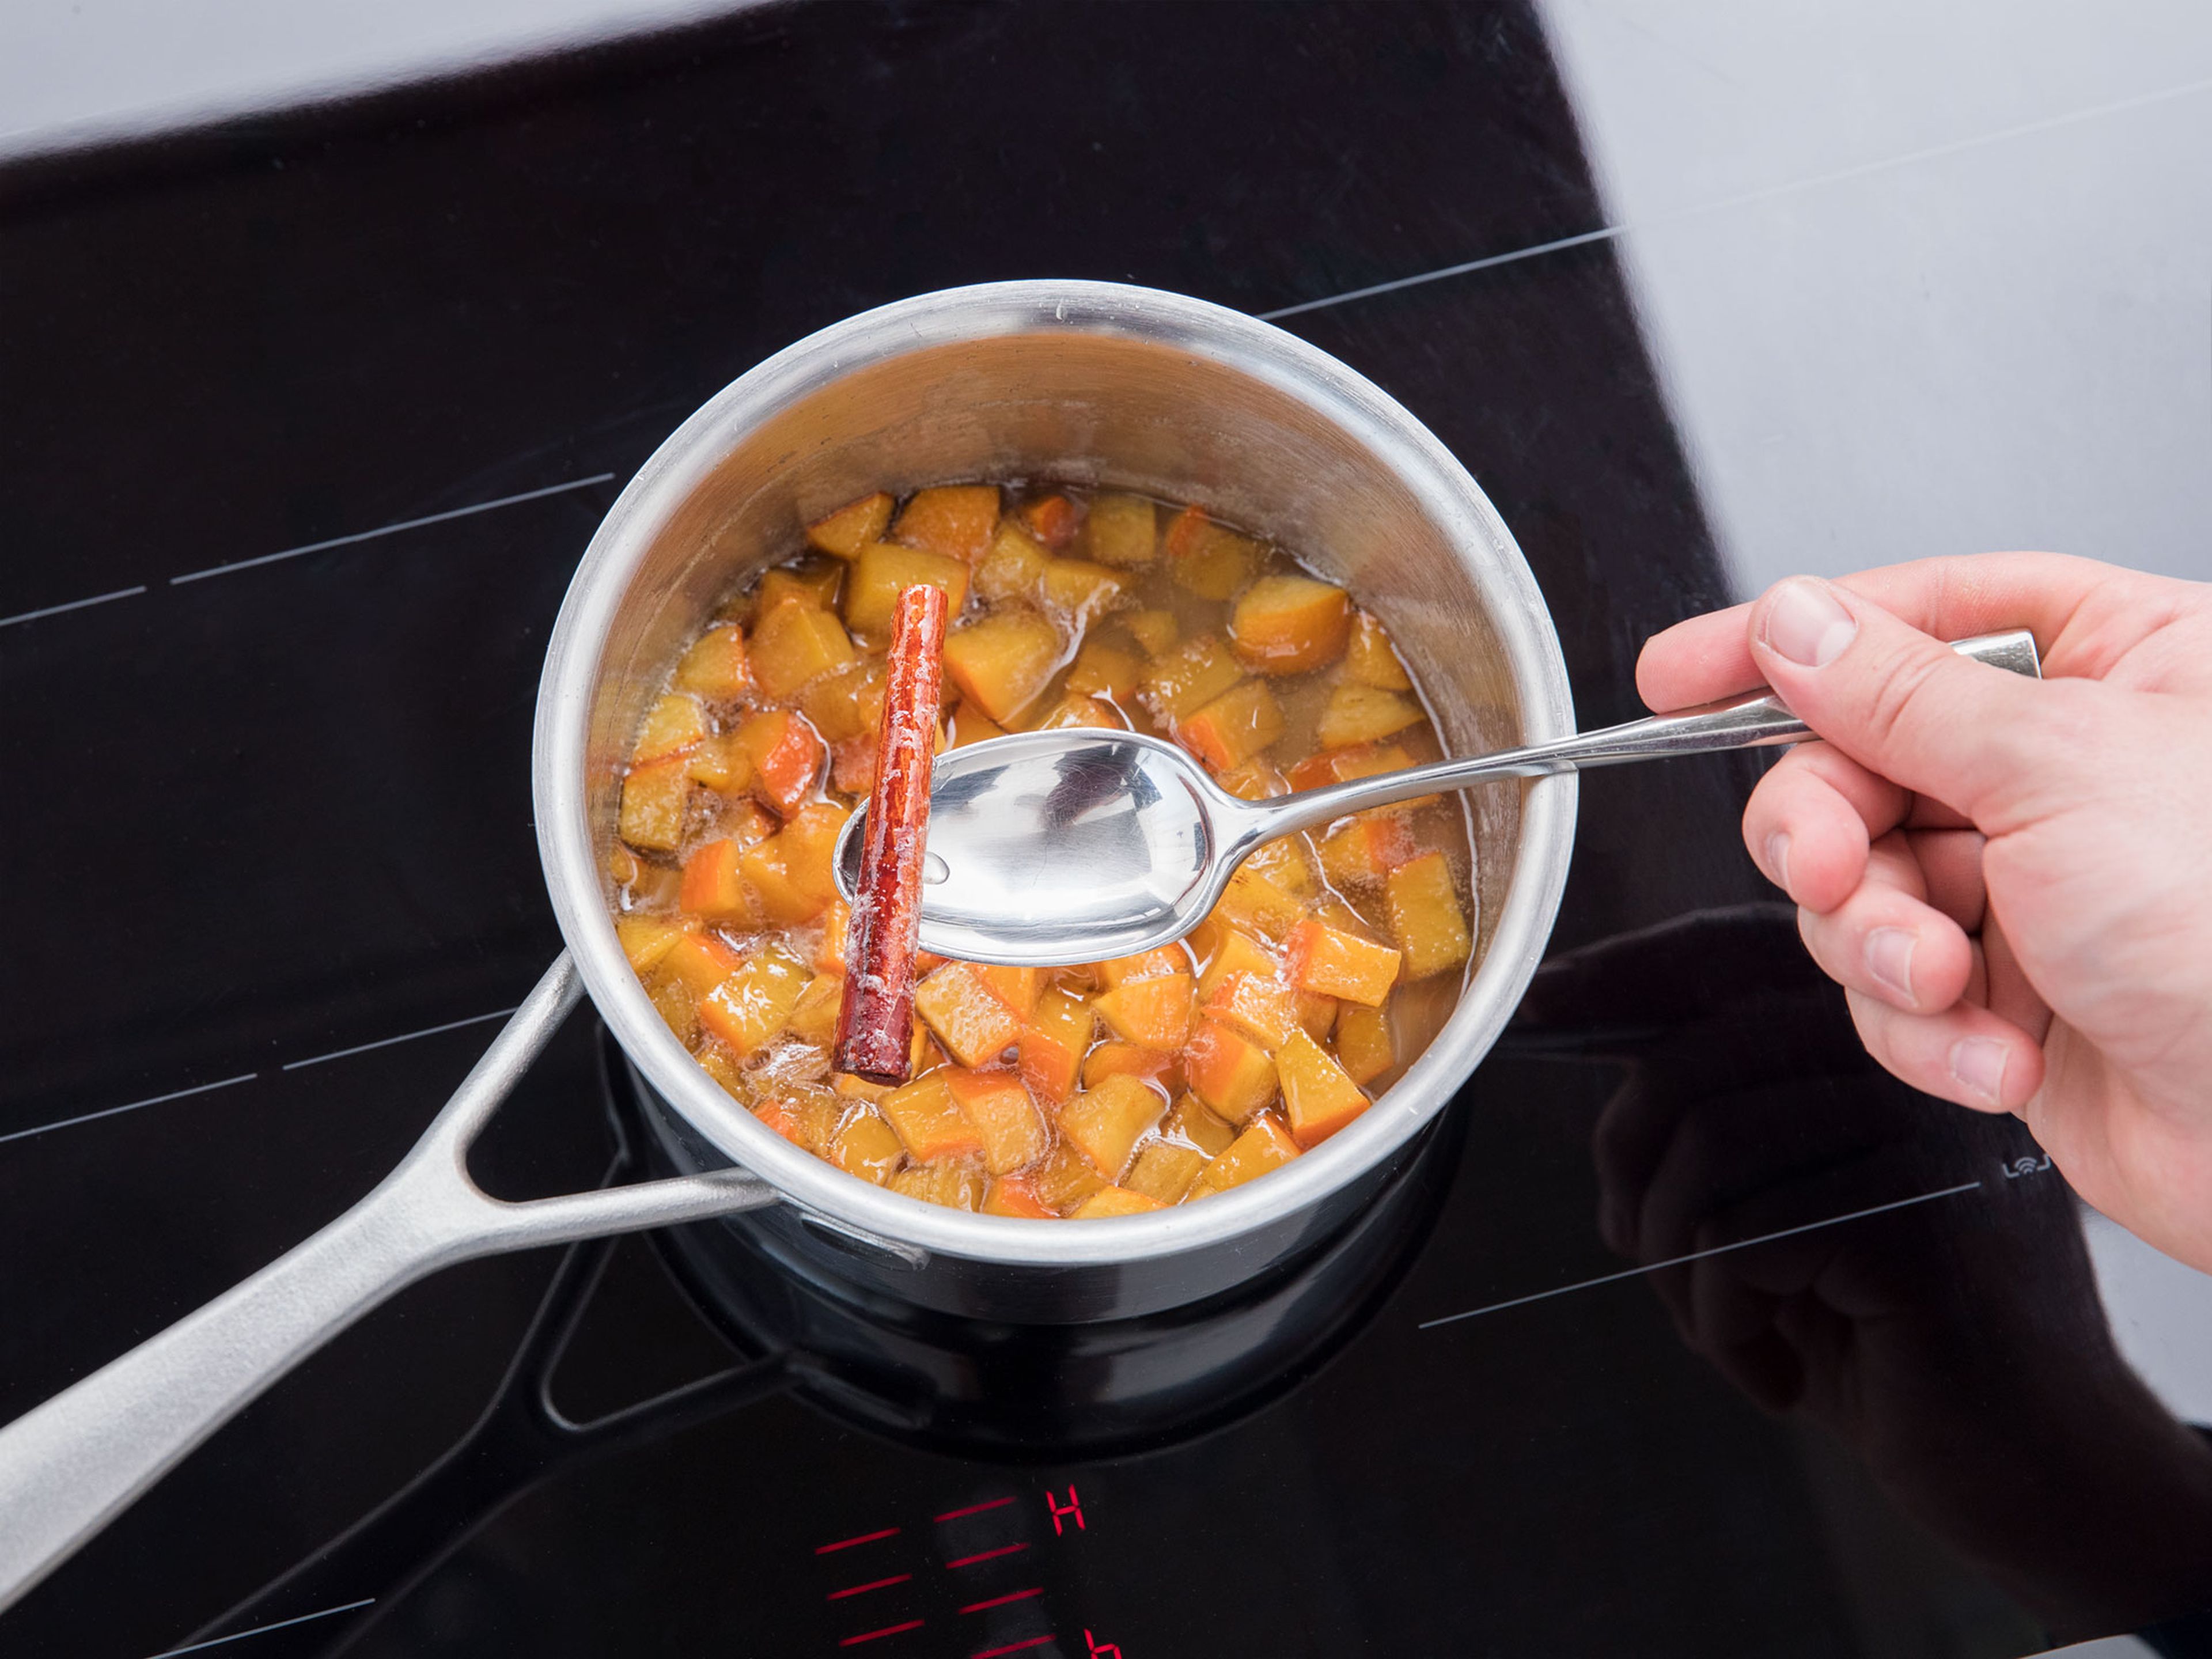 Dice persimmon and add to a saucepan. Add cinnamon stick, sugar, and water and let simmer for approx. 10 – 15 min., or until the mixture is syrupy. Remove cinnamon stick and strain the mixture through a sieve. Let syrup cool down and set persimmon aside.